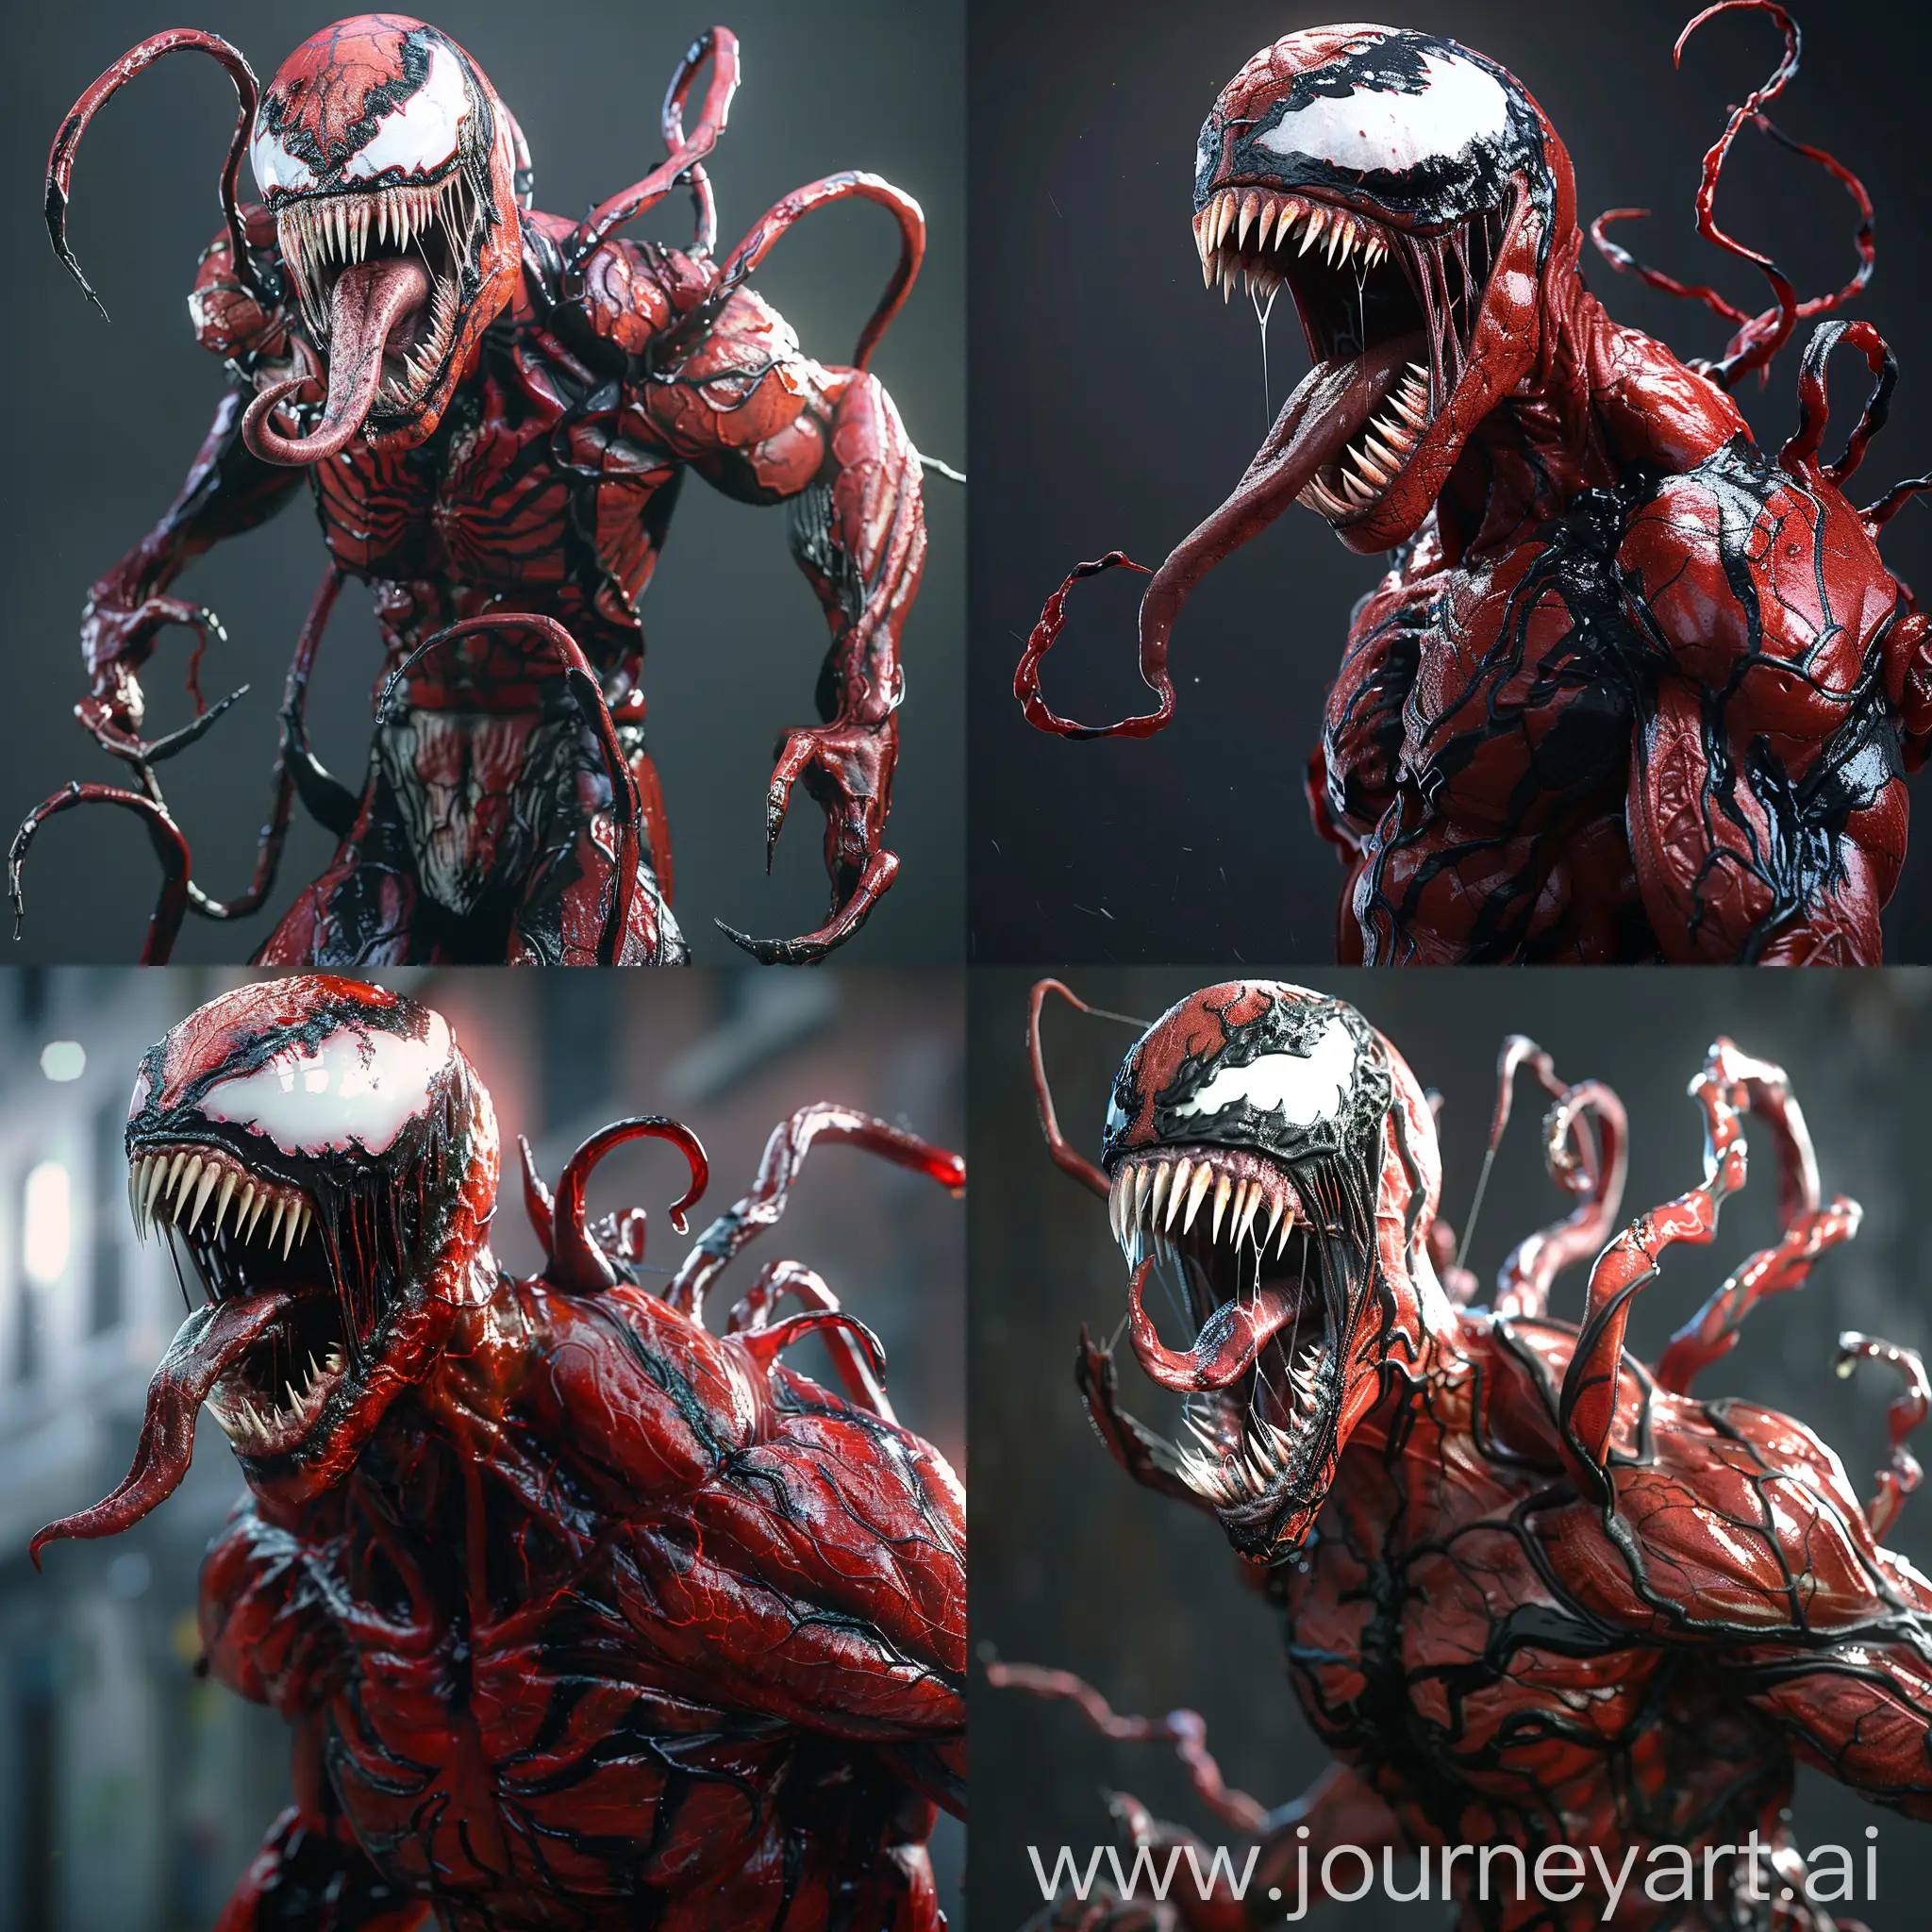 Carnage-Symbiote-Unleashing-Chaos-in-UltraDetailed-Realism